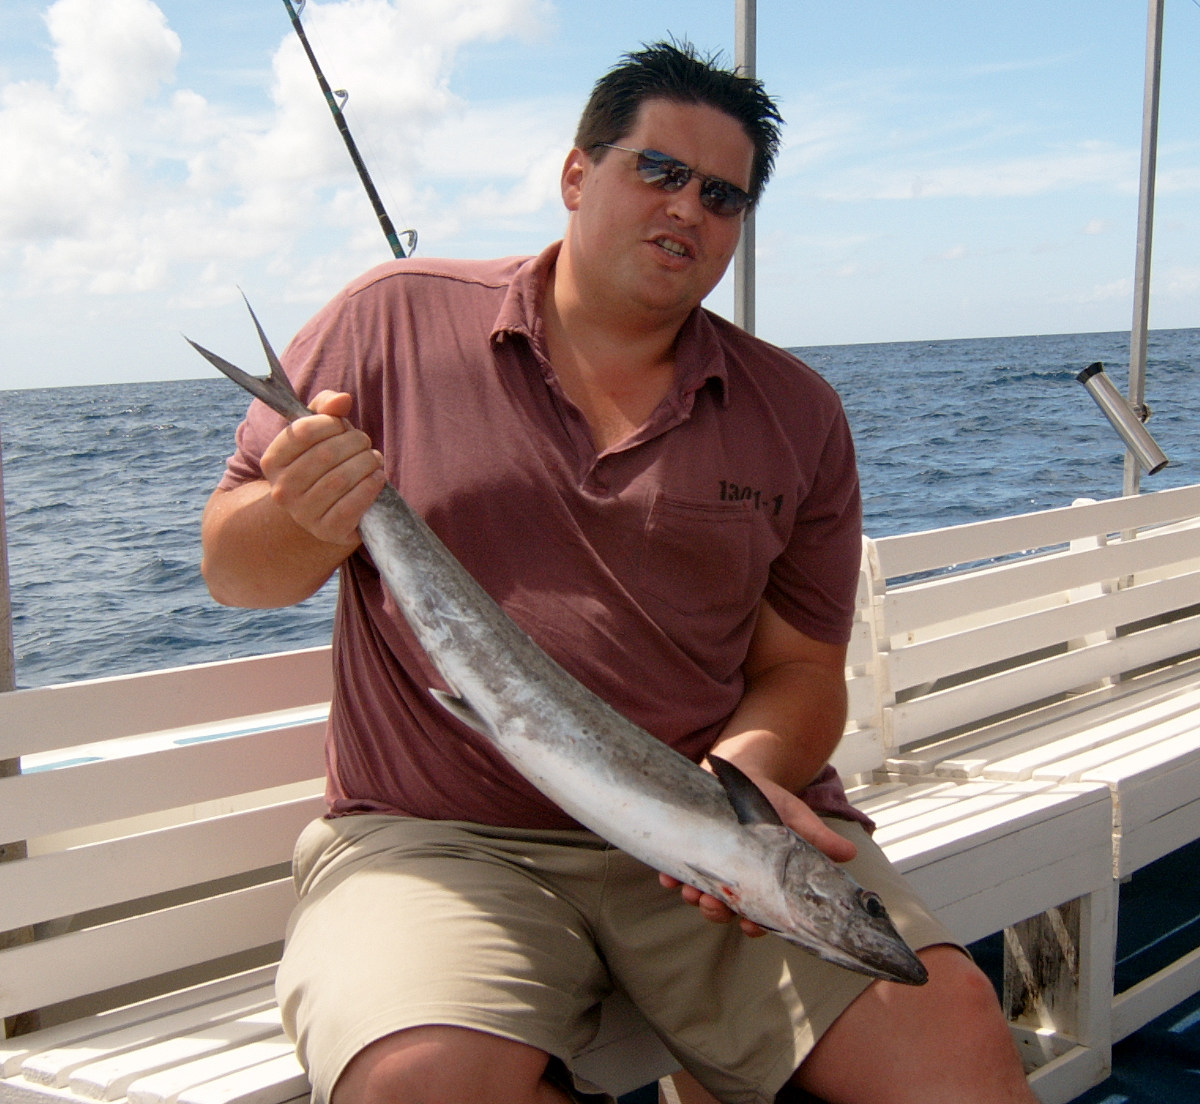 I spend some of my time deep seas fishing in Saint Lucia waters.